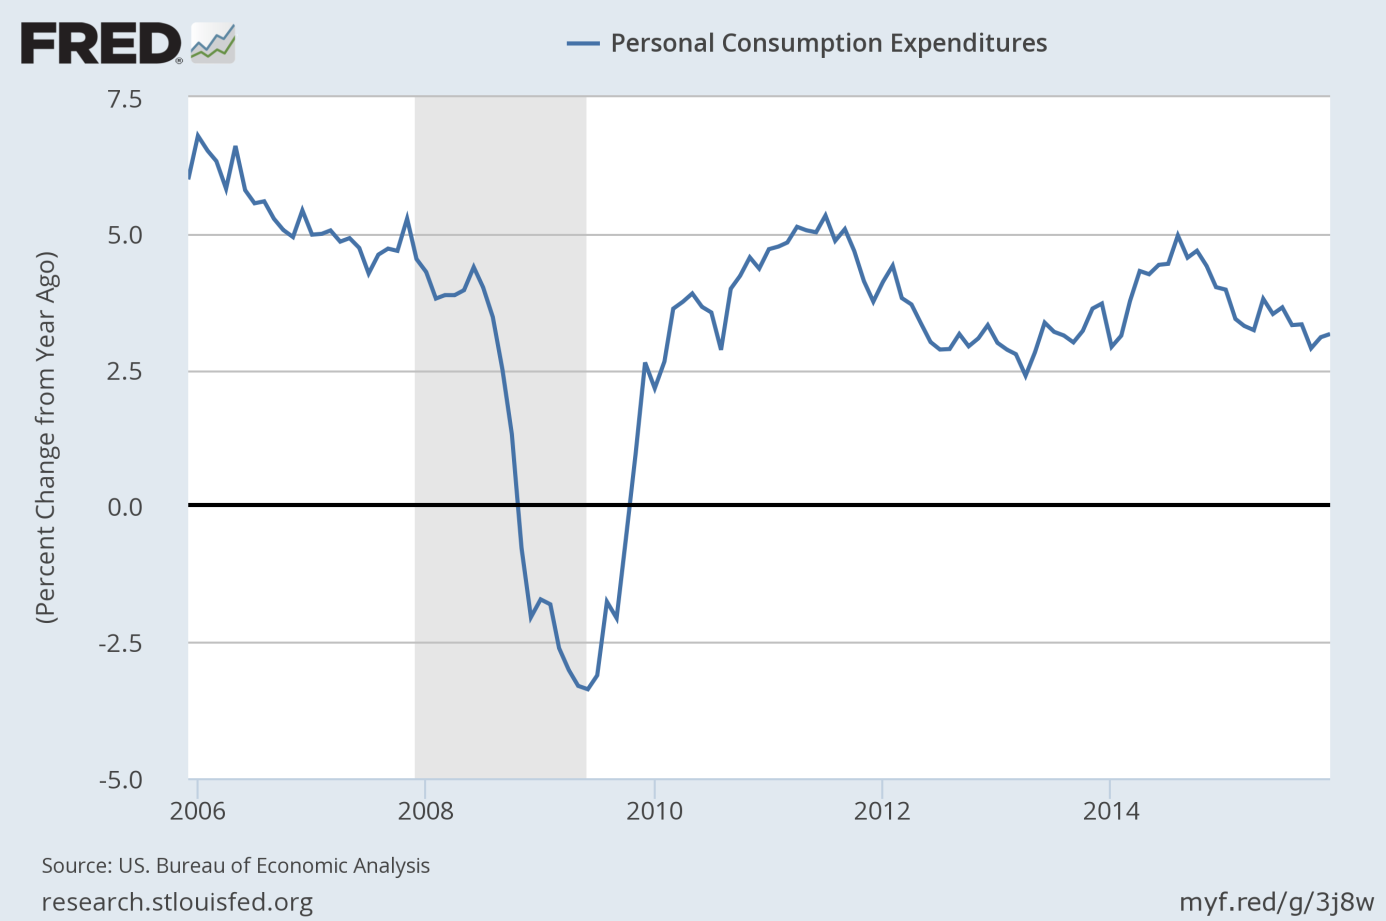 Personal Consumption Expenditures (percent change from year ago) from 2006 to 2015.